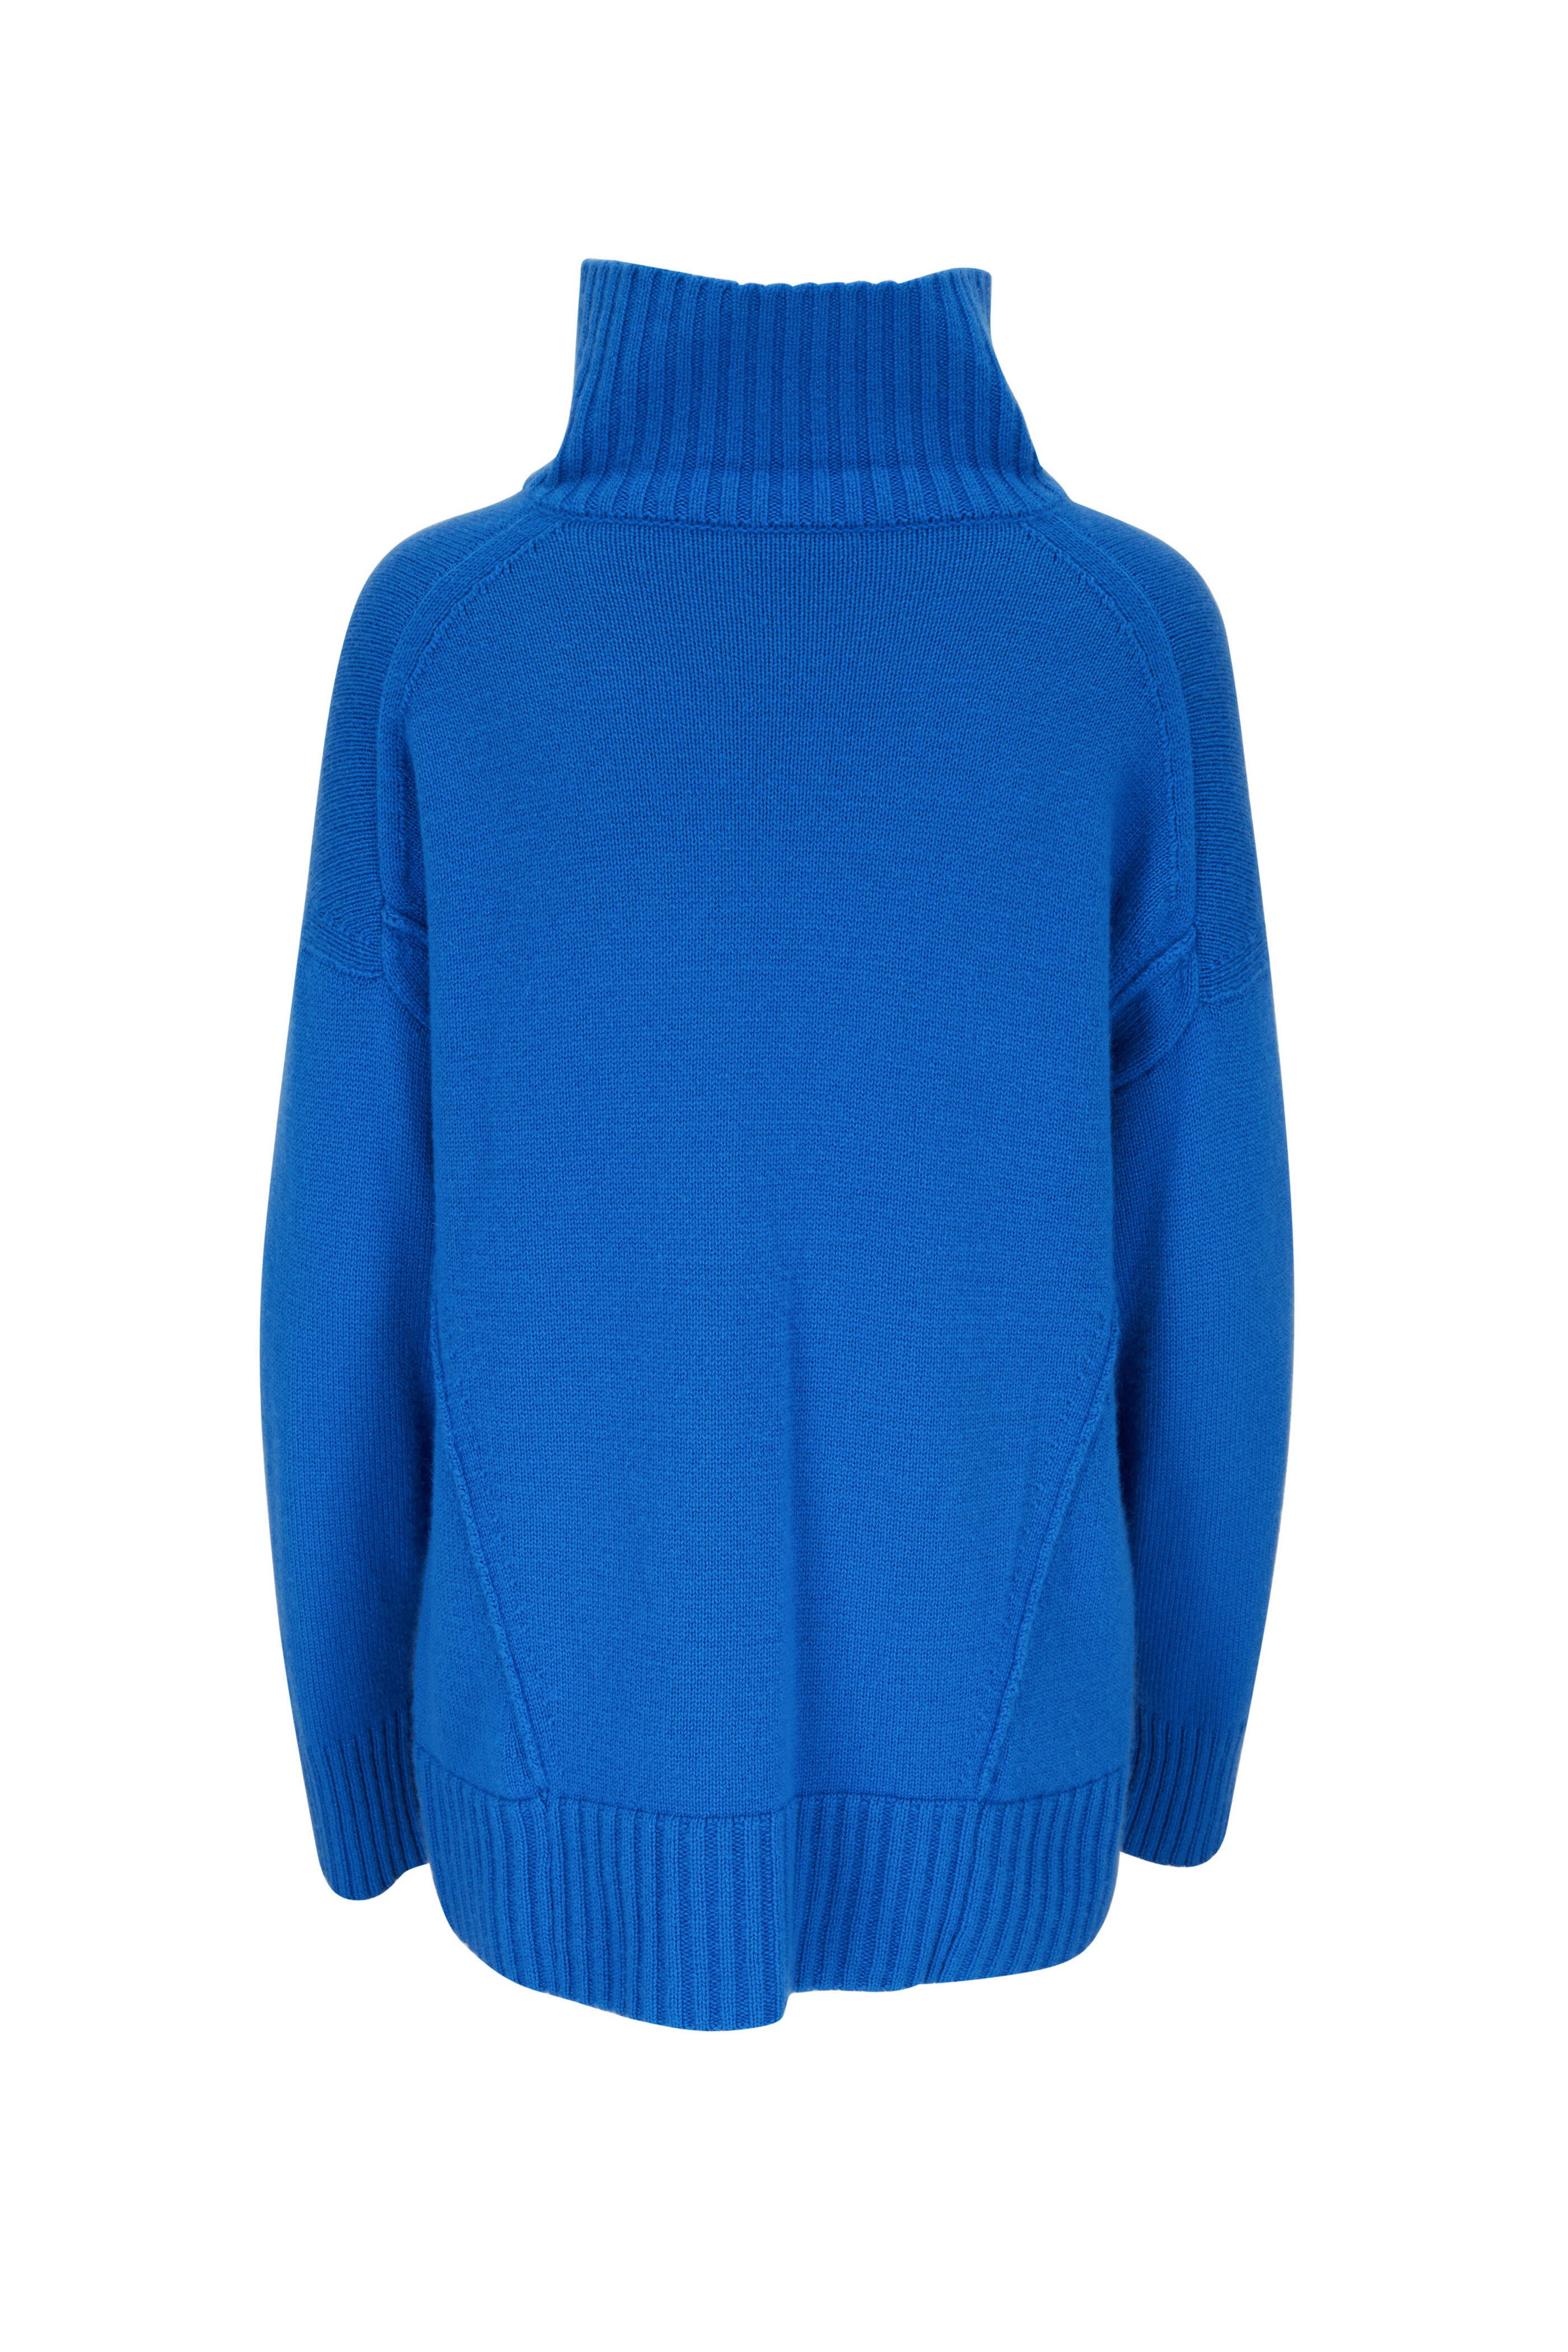 Women's Turtleneck Sweater In Cashmere And Silk Lurex Knit by